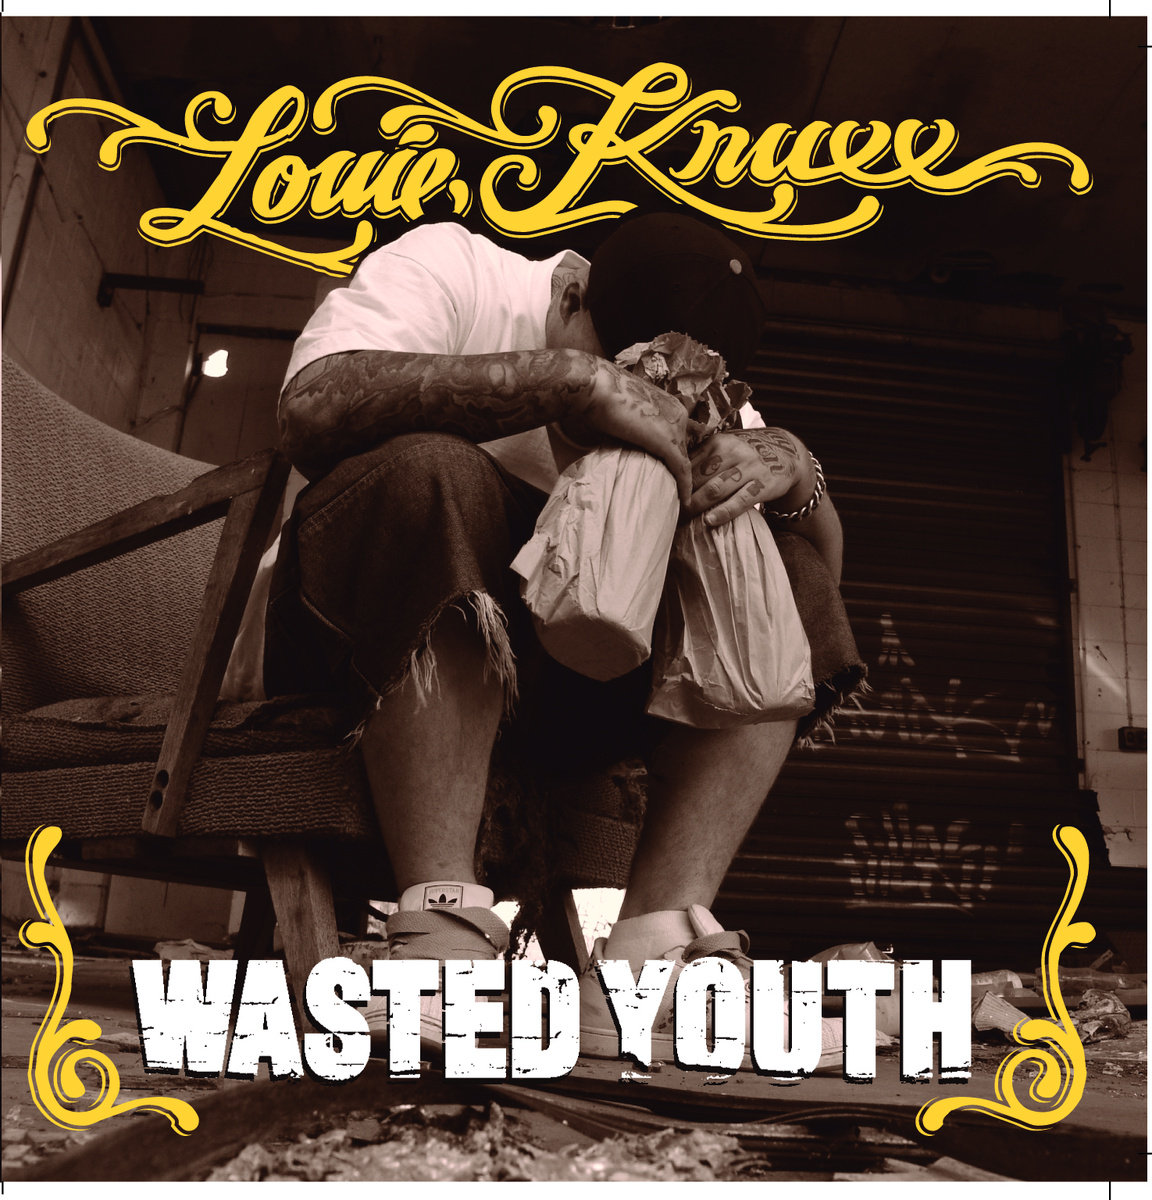 Wasted Youth | Louie Knuxx